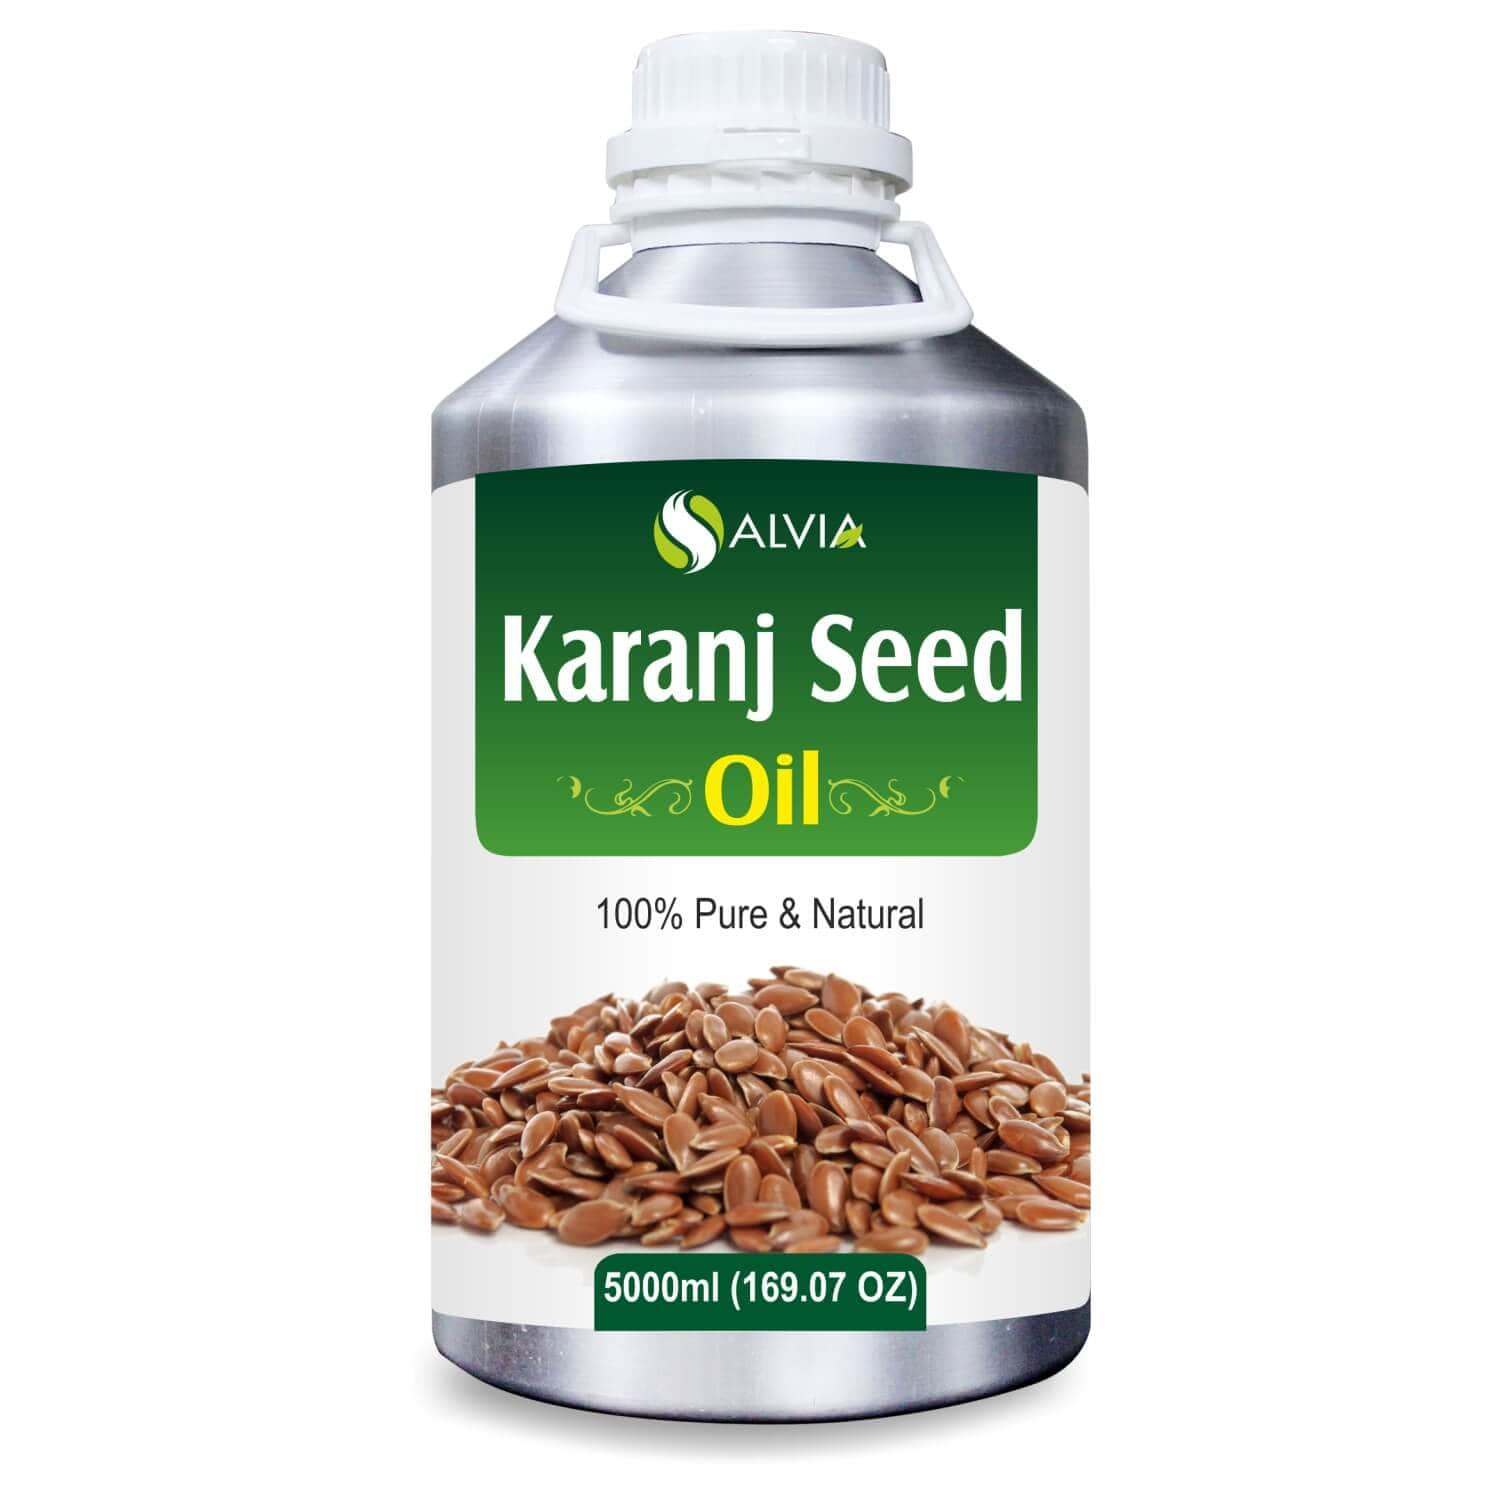 Salvia Natural Carrier Oils 5000ml Karanj Seed Oil (Pongamia glabra) 100% Pure & Natural Uncut Carrier Oil Promotes Wound Healing, Insecticidal Properties, Manages Dandruff & Skin Issues